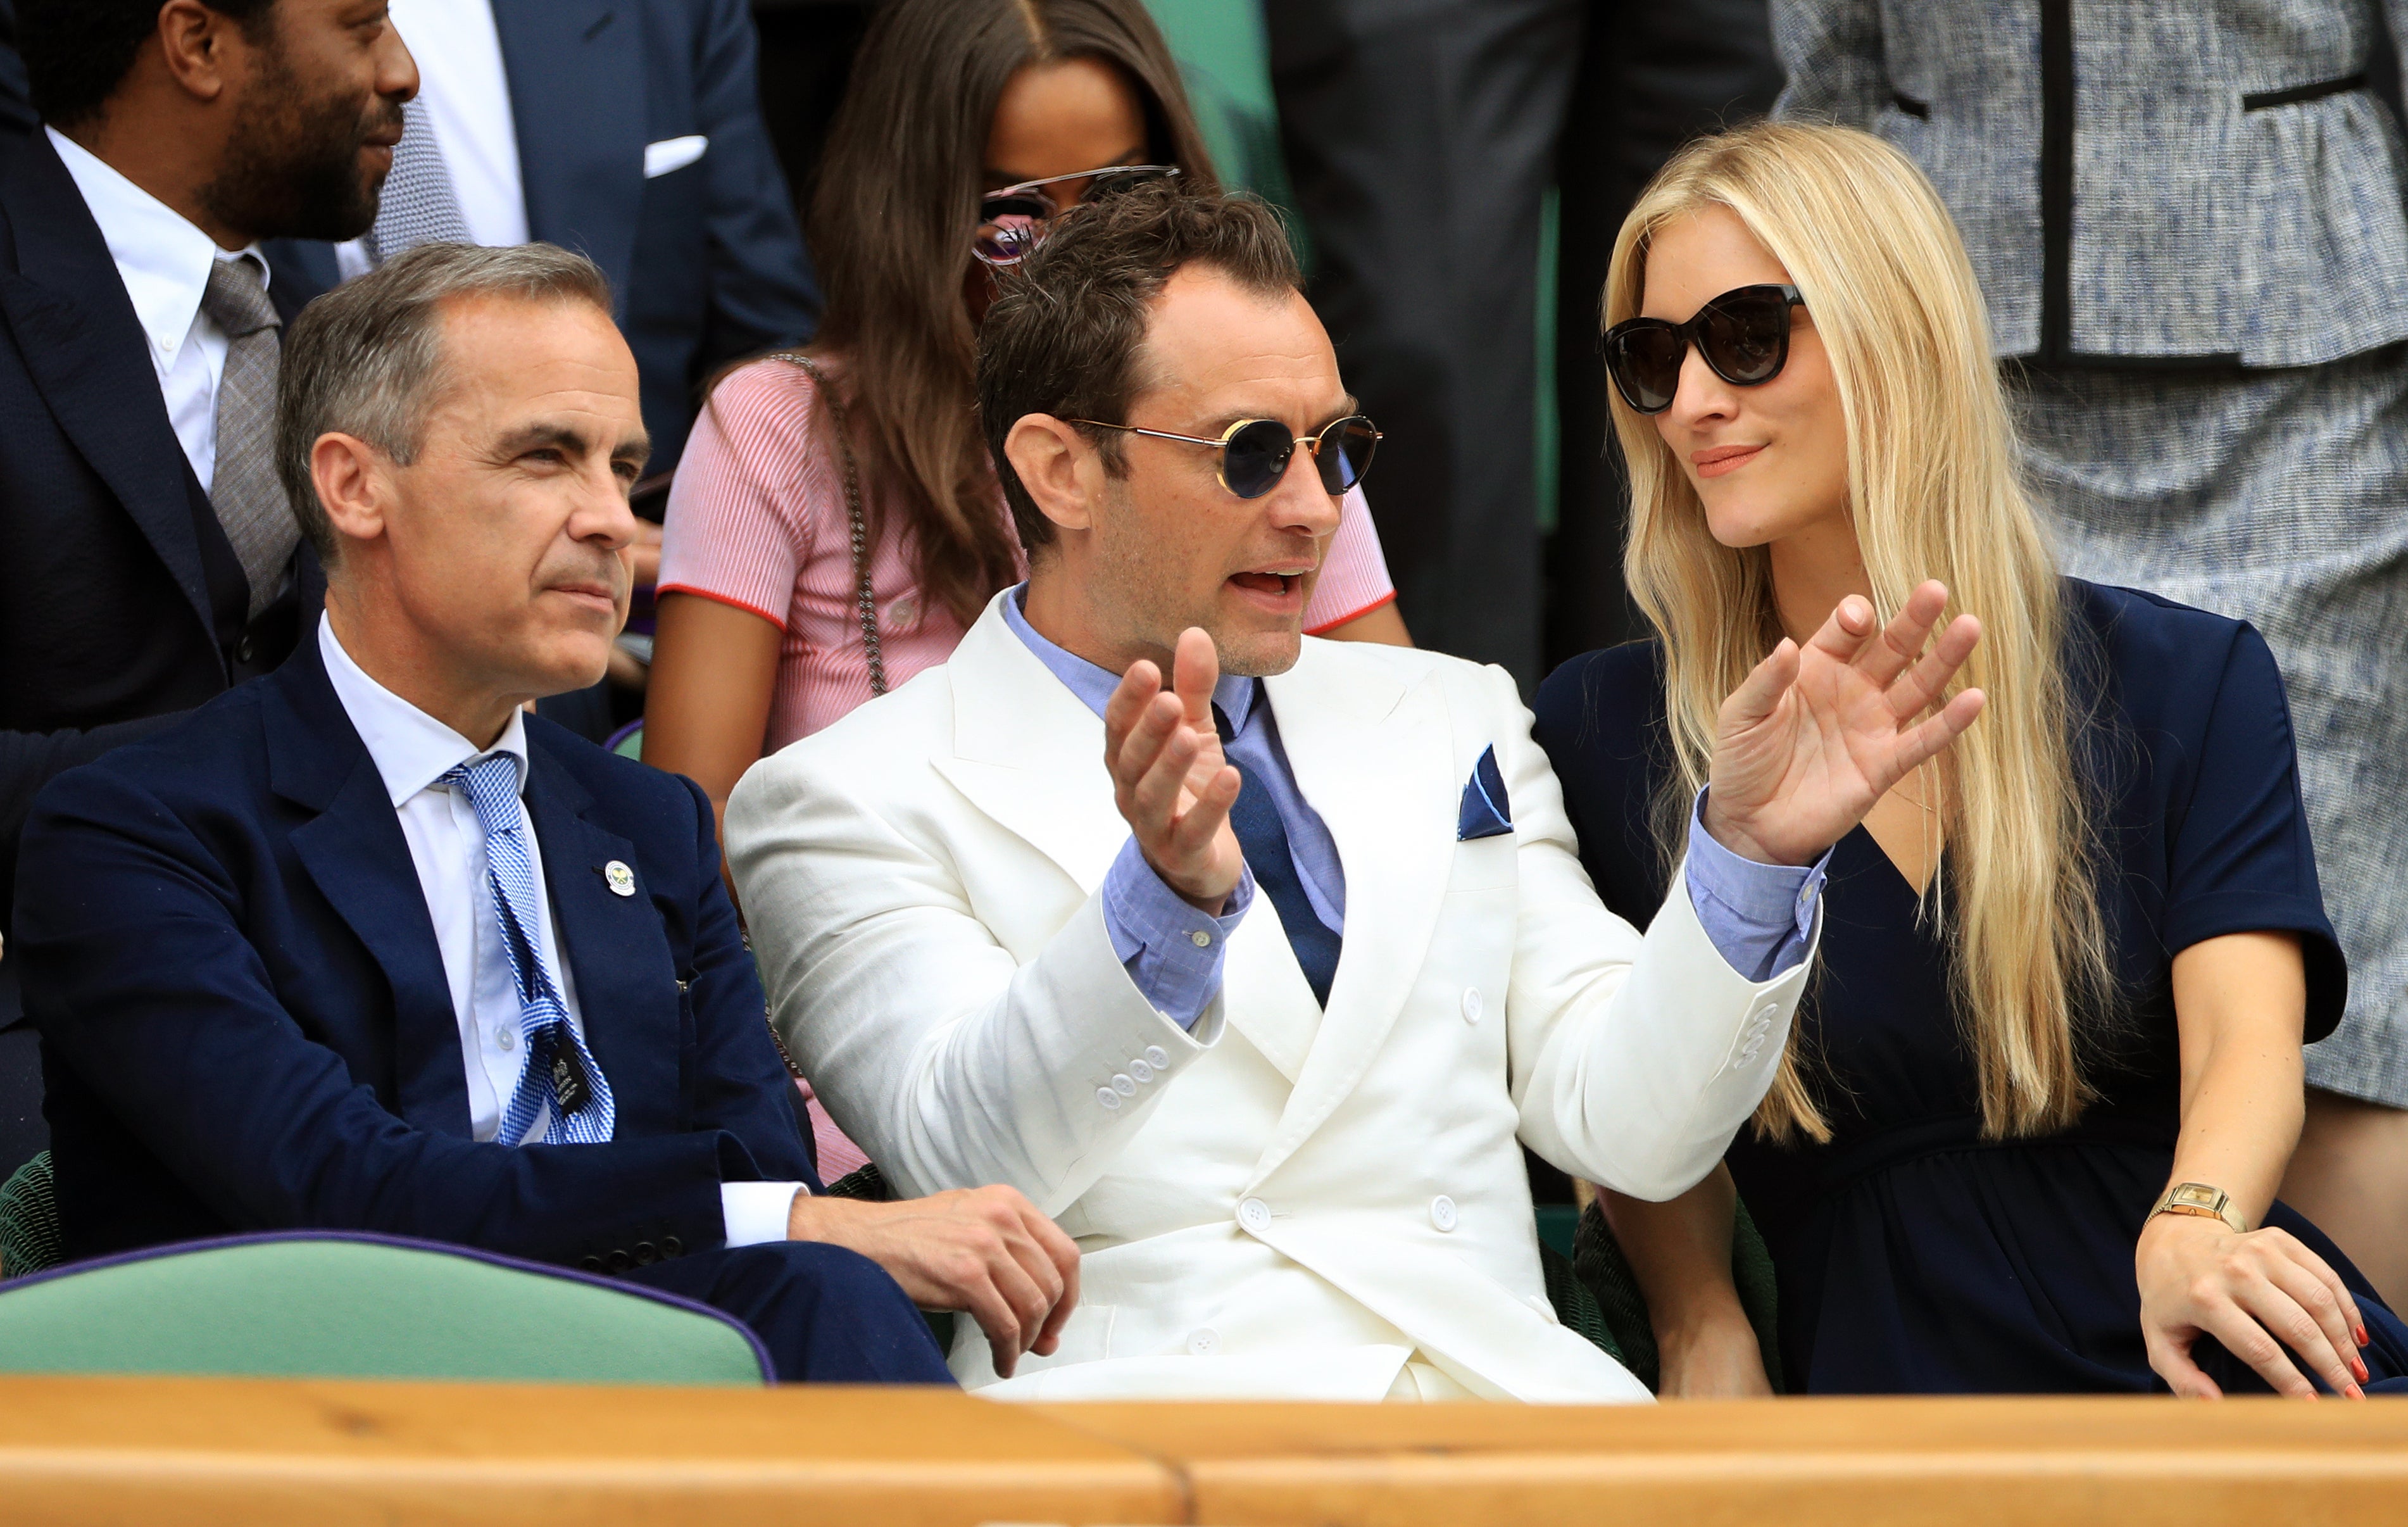 Royal Box guests (left-right) Mark Carney, Jude Law and Phillipa Coan on day eleven of the Wimbledon Championships at the All England Lawn Tennis and Croquet Club, Wimbledon